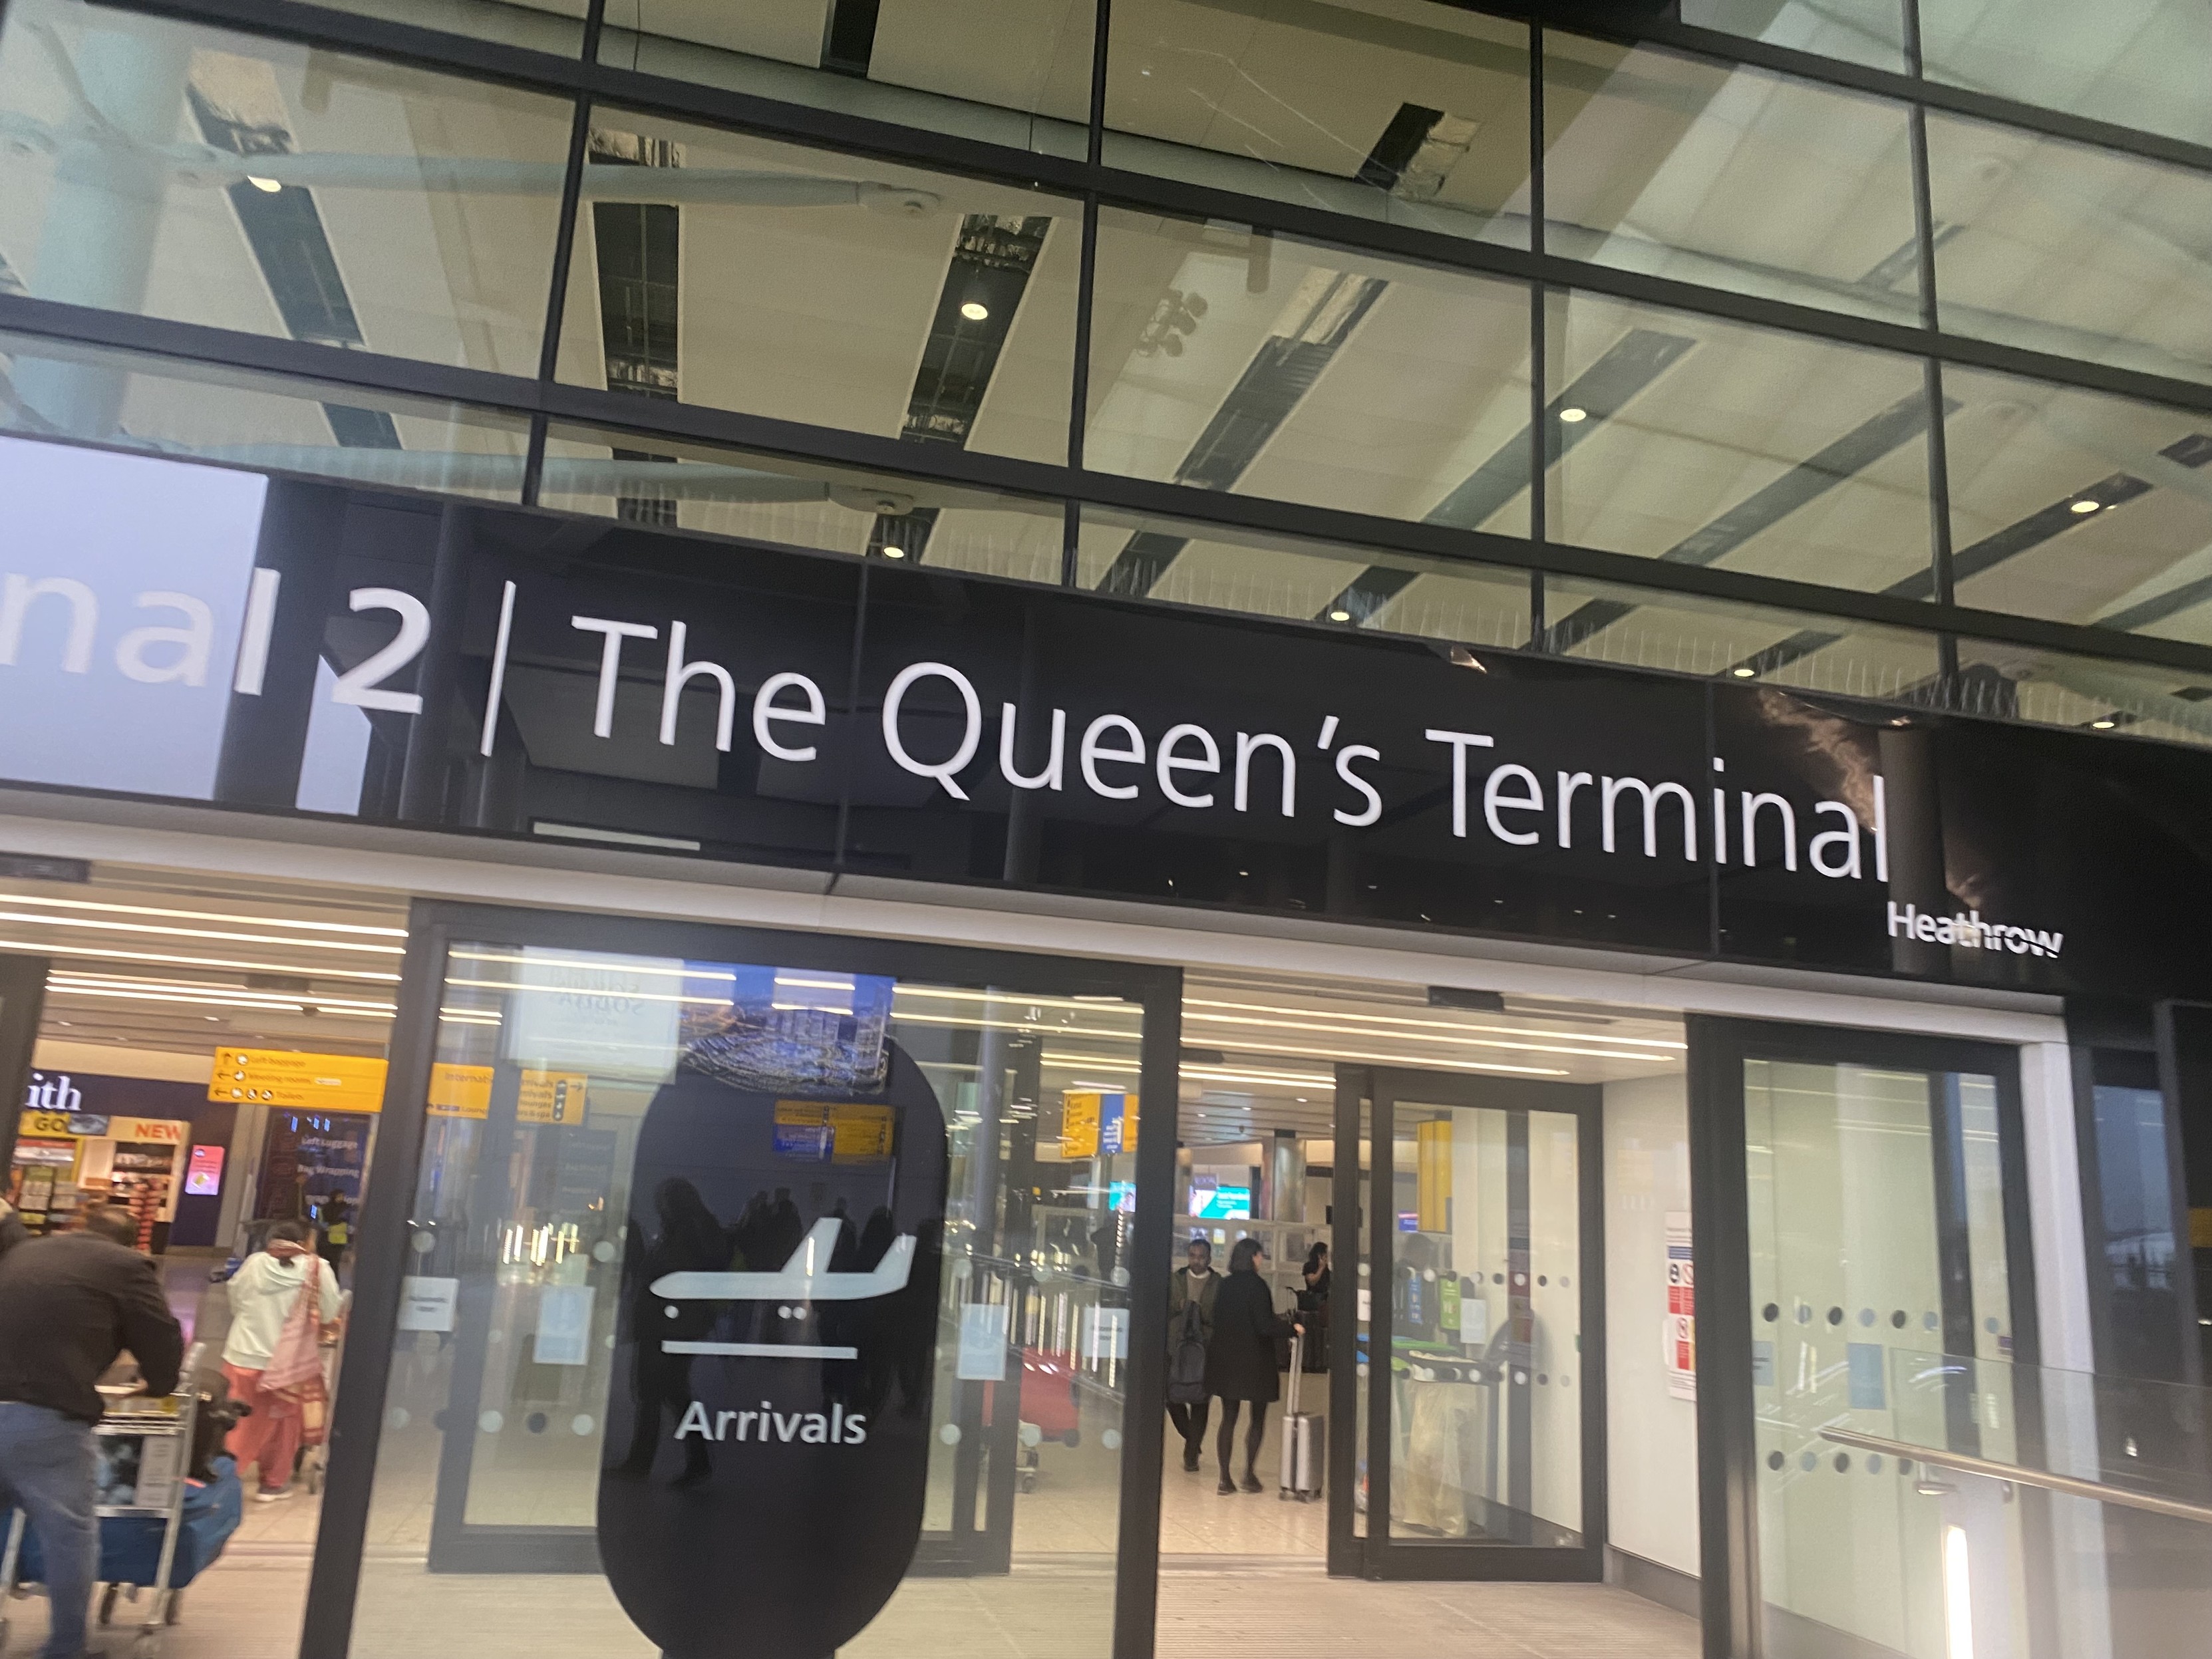 The Queen's Terminal
- sign at Heathrow